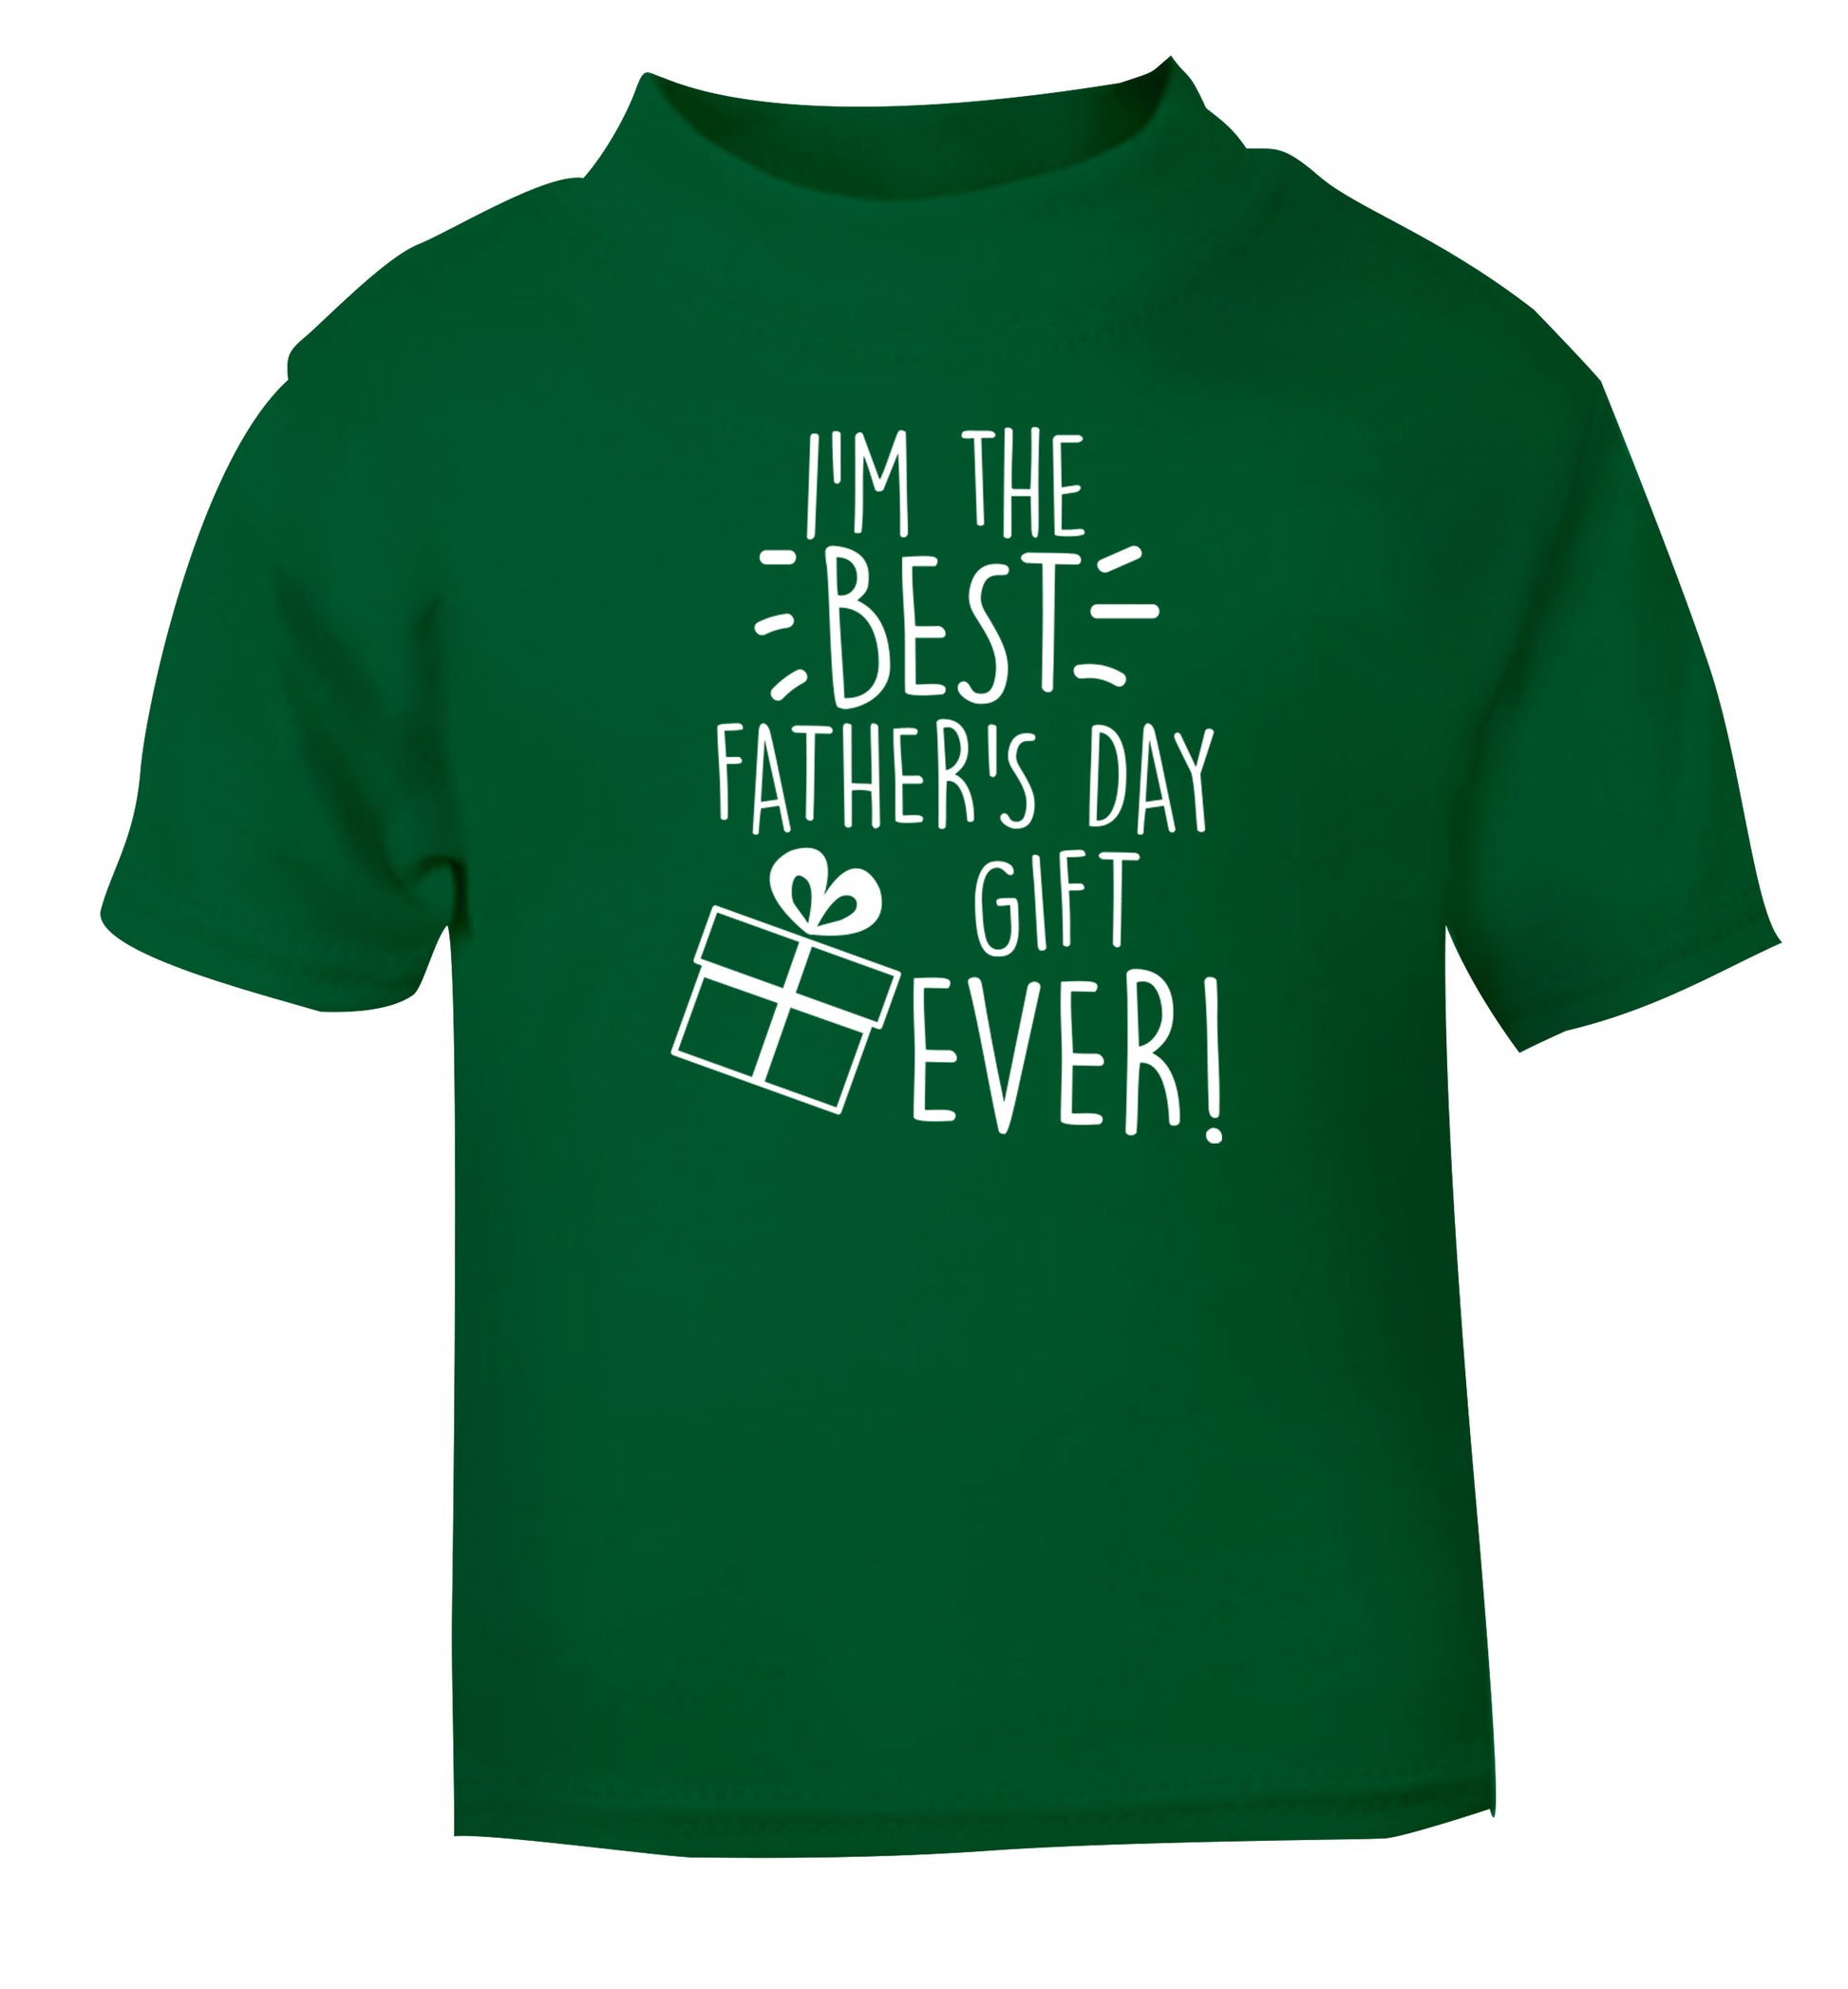 I'm the BEST father's day gift ever! green Baby Toddler Tshirt 2 Years